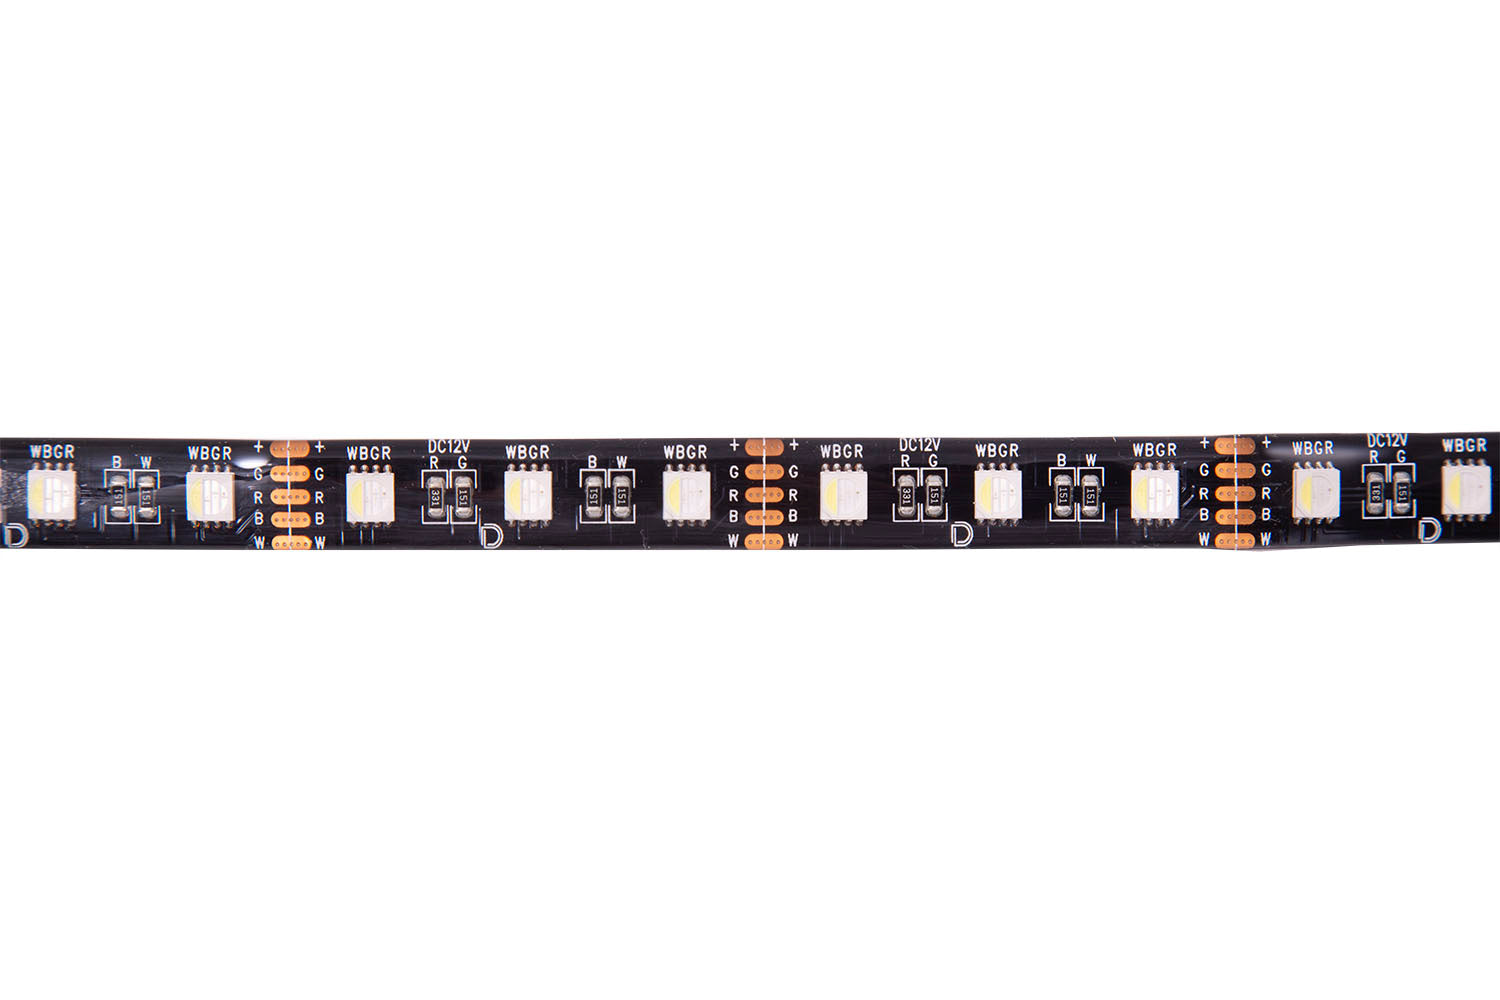 RGBW Multicolor Flexible 5050 SMD LED Strip Diode Dynamics-